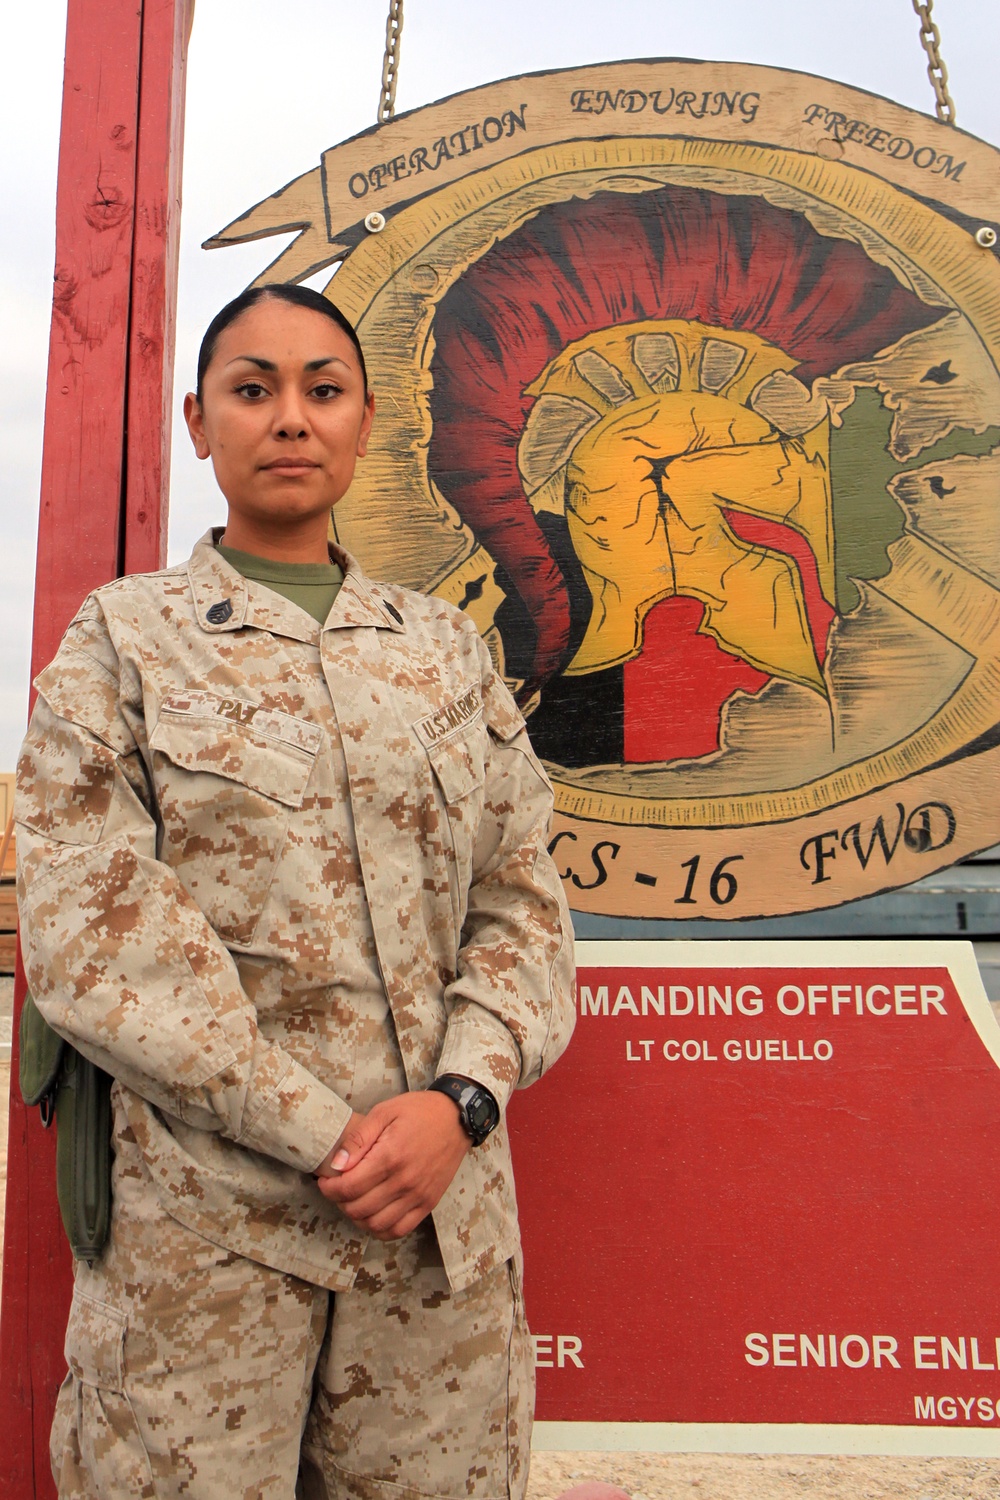 Despite spinal cord surgery, Marine continues to push forward on third combat deployment